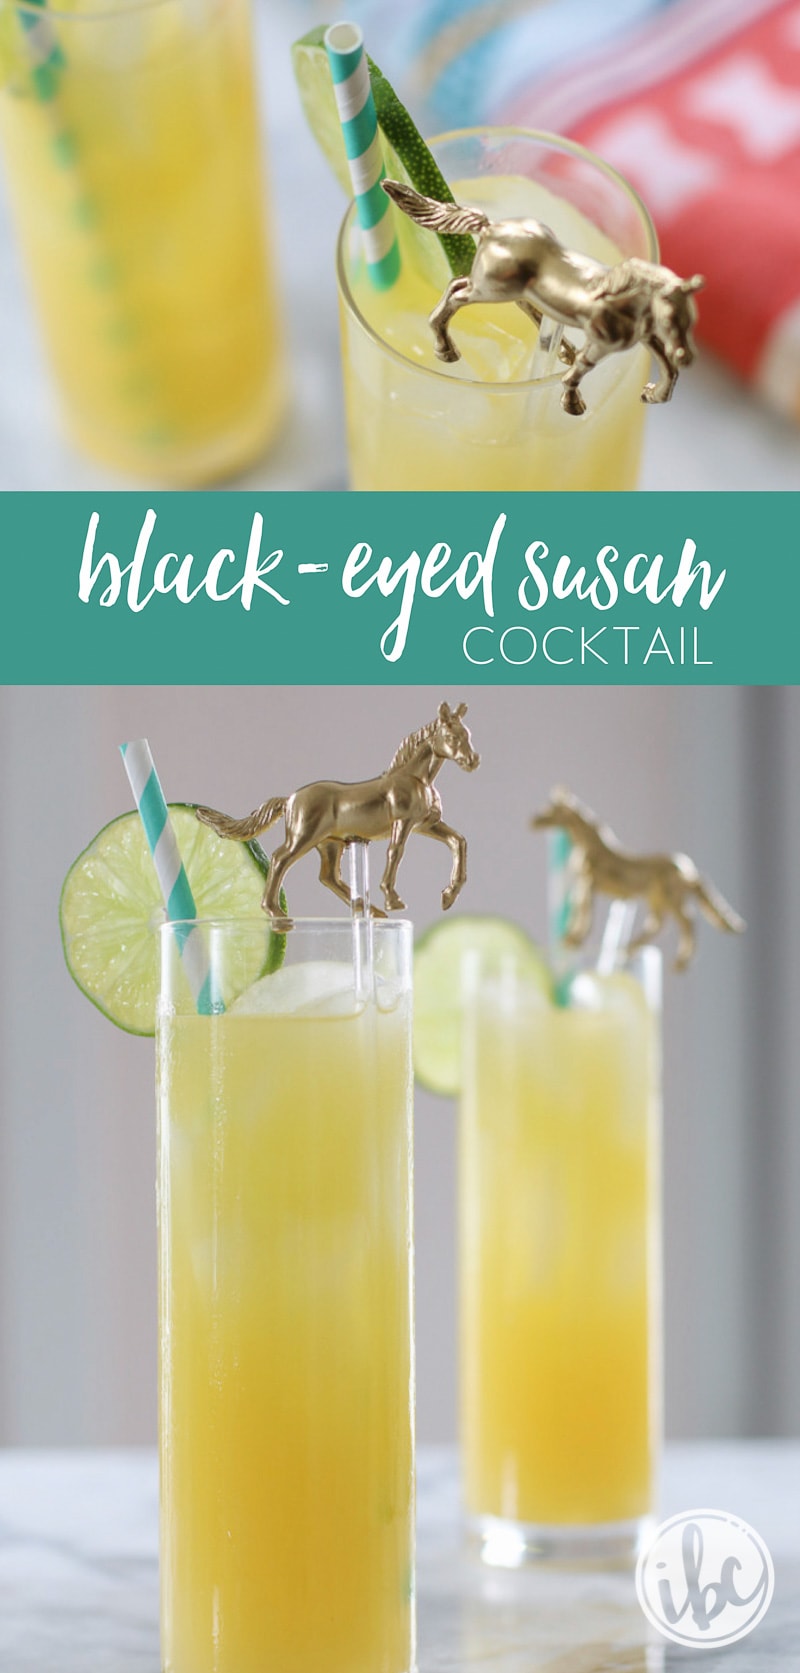 The Black-Eyed Susan Cocktail (the official drink of Preakness) is a bright and citrusy cocktail perfect for the season! #cocktail #preakness #kentuckyderby #derby #recipe #drink